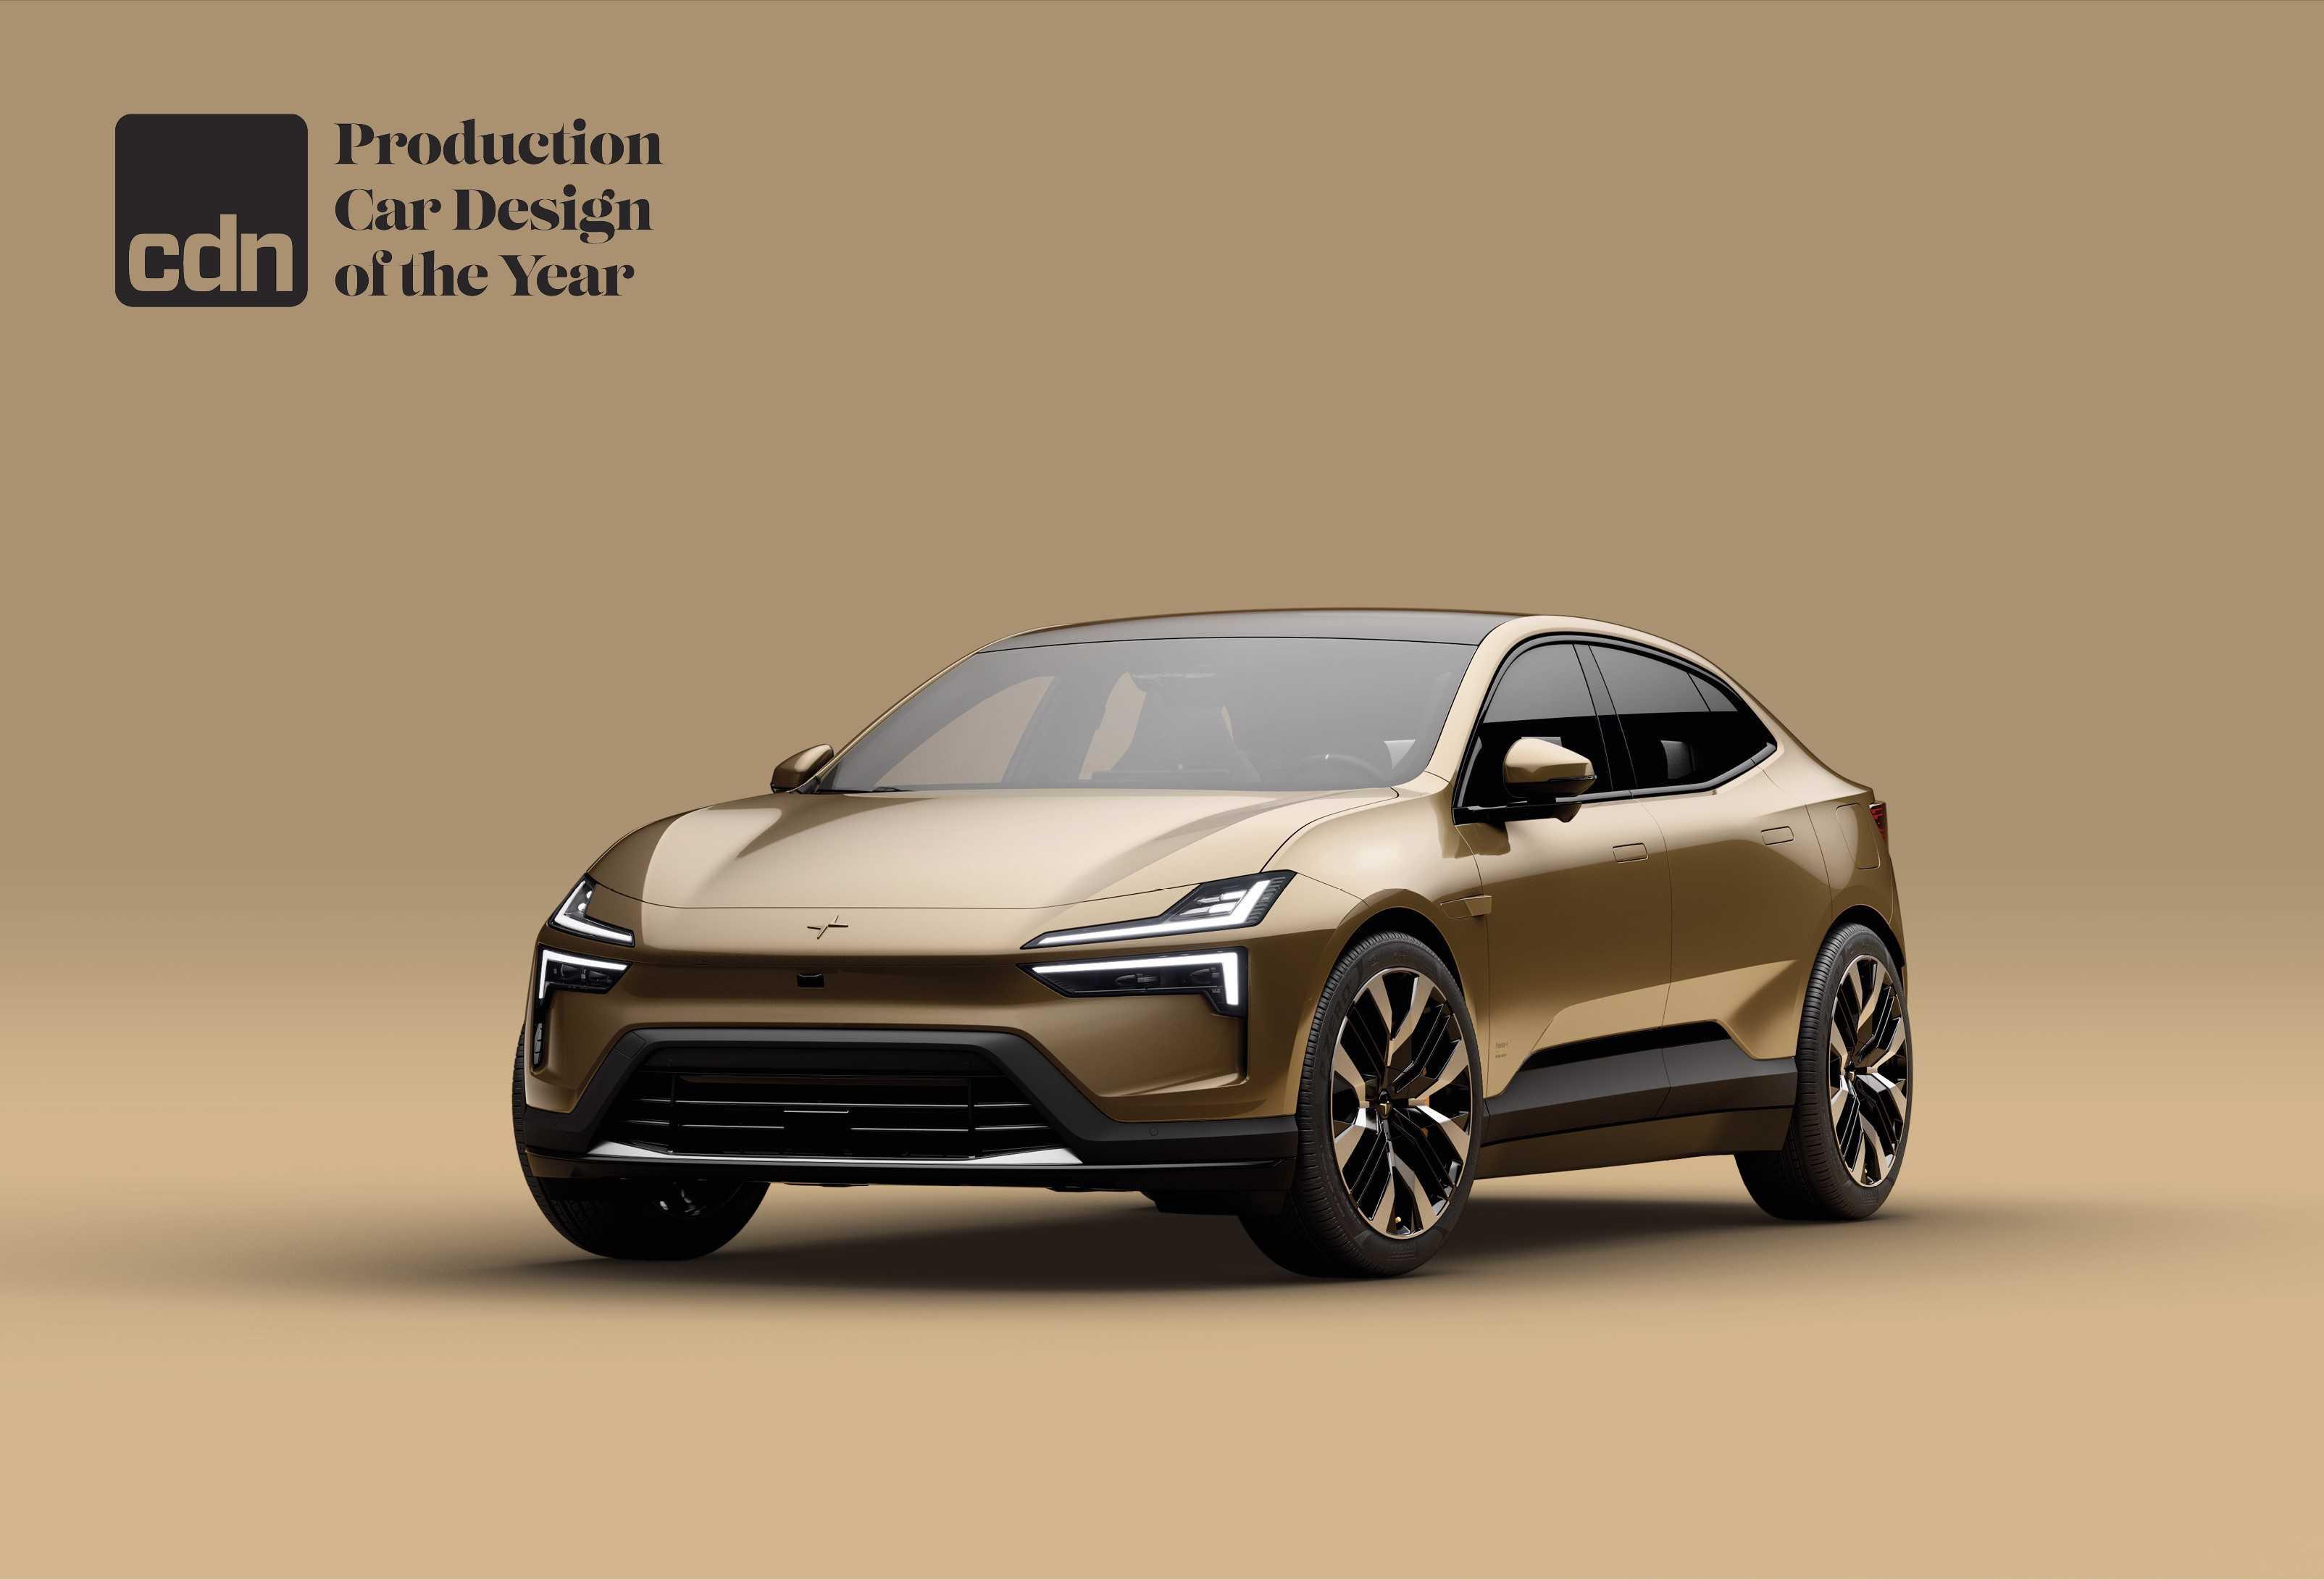 Polestar wins Production Car Design of the Year